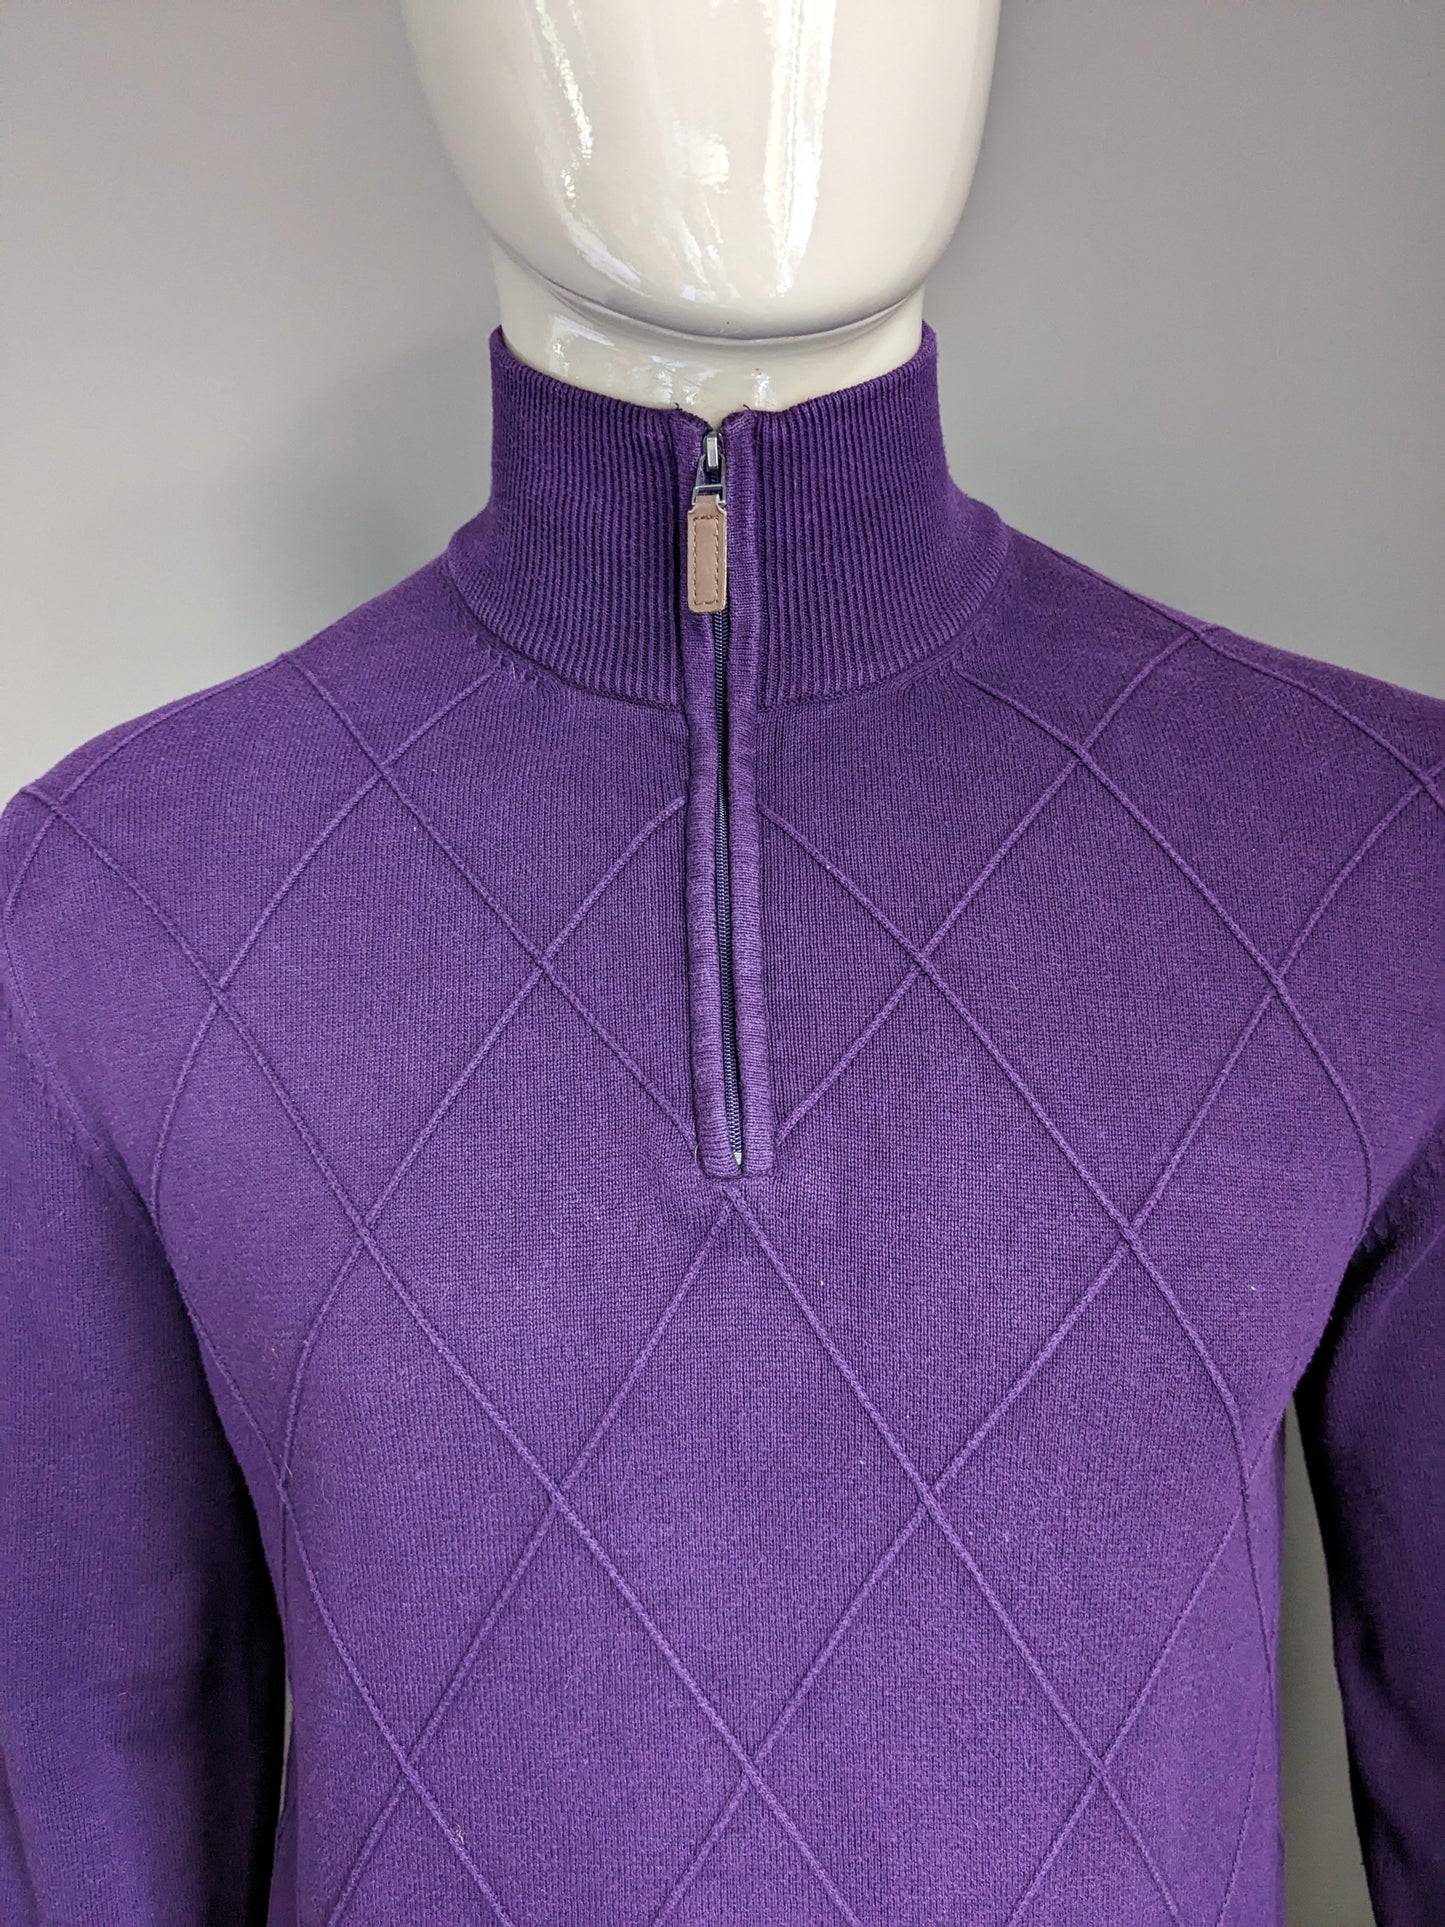 Dunnes sweater with zipper. Purple with tangible motif. Size M.